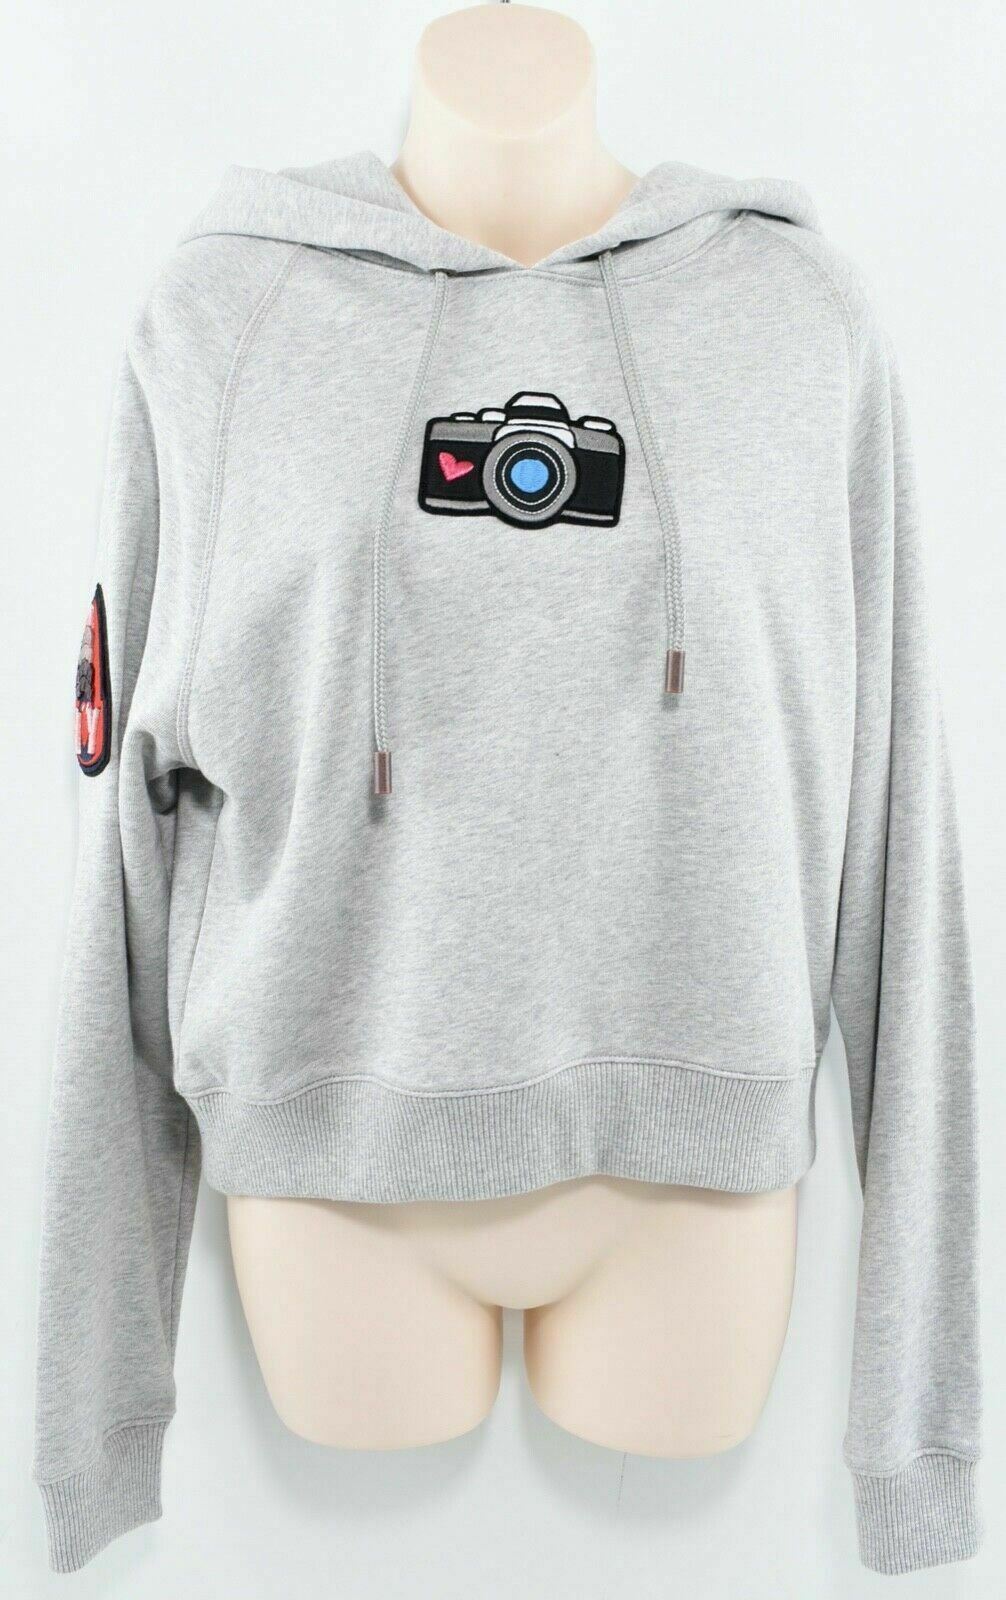 TOMMY HILFIGER x GIGI HADID Women's Cropped Hoodie, Grey/with Appliques, size XL